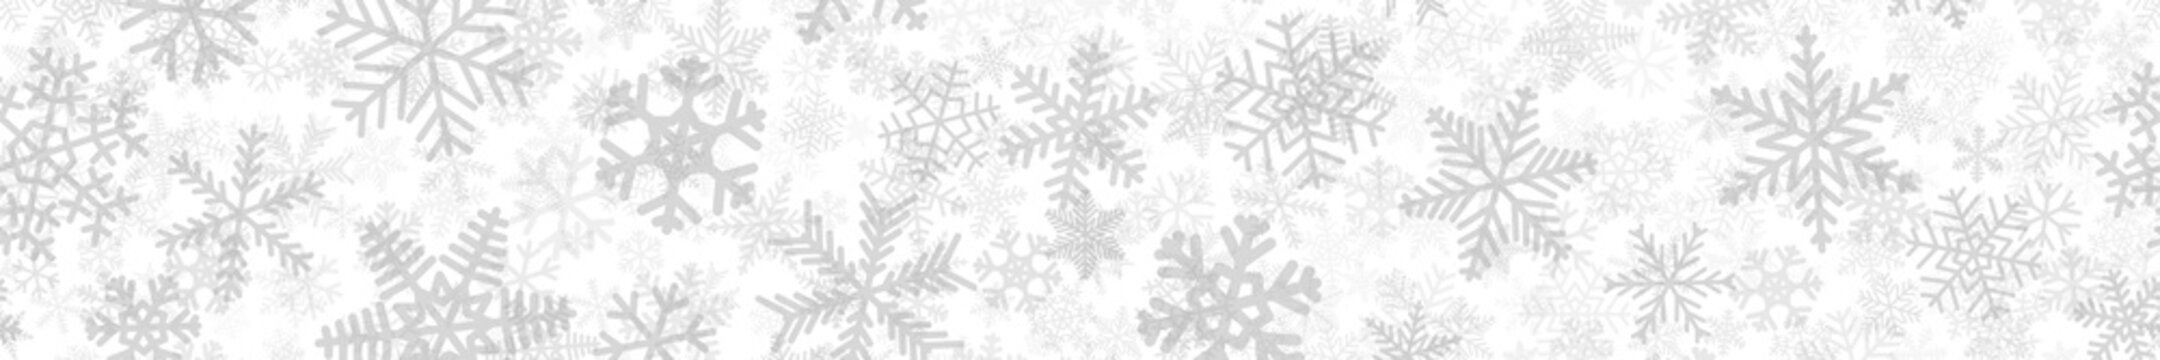 Christmas horizontal seamless banner of many layers of snowflakes of different shapes, sizes and transparency. Gray on white © Aleksei Solovev